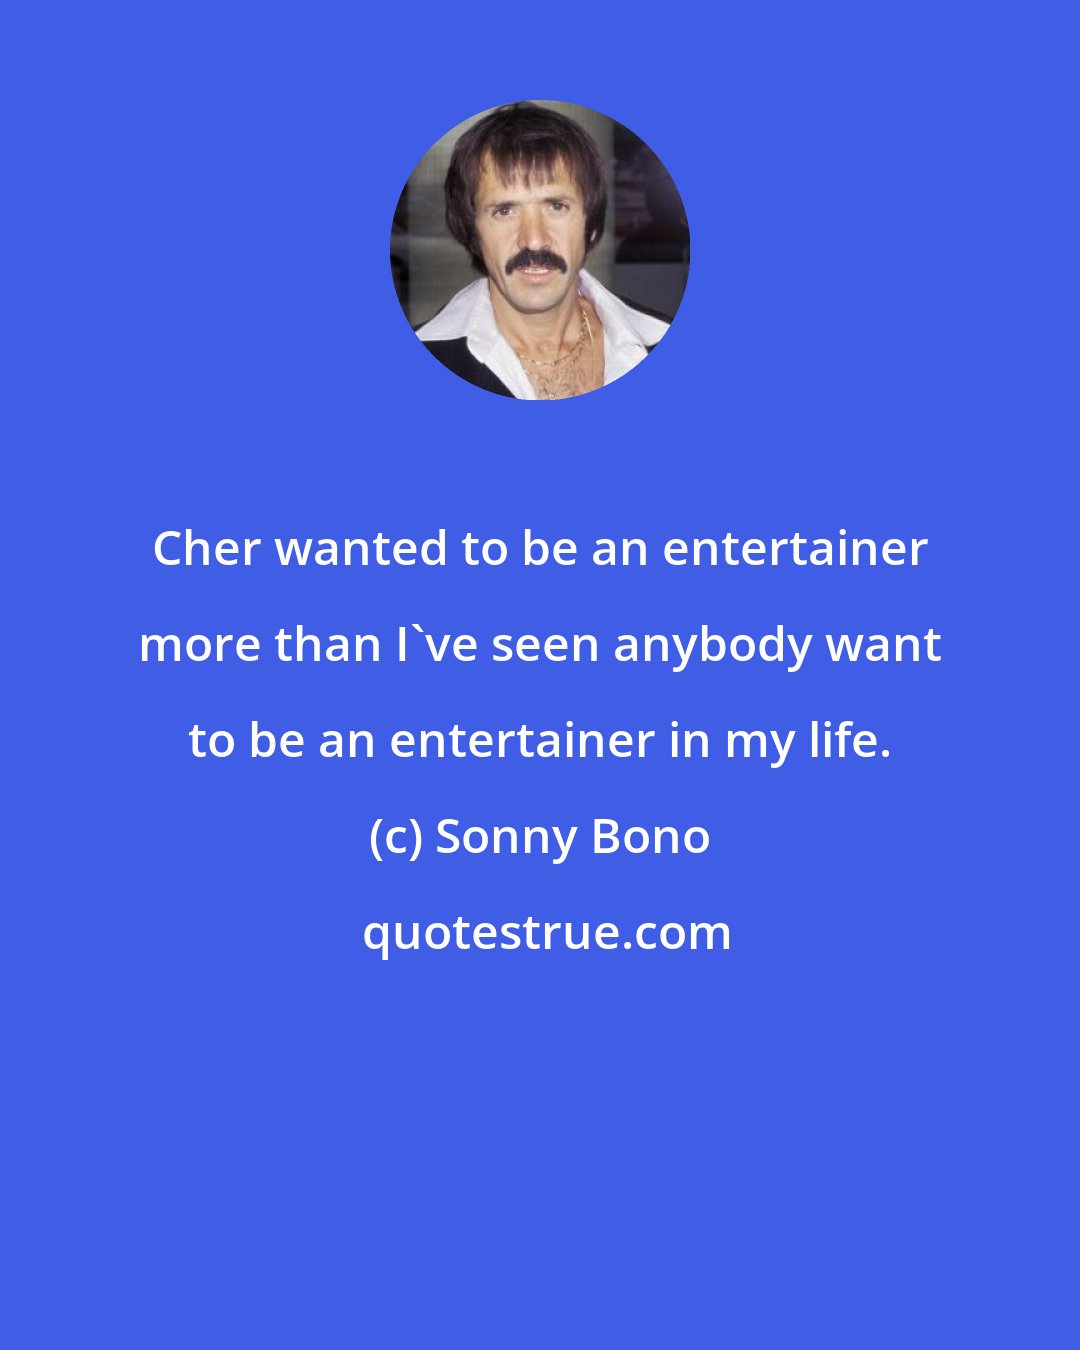 Sonny Bono: Cher wanted to be an entertainer more than I've seen anybody want to be an entertainer in my life.